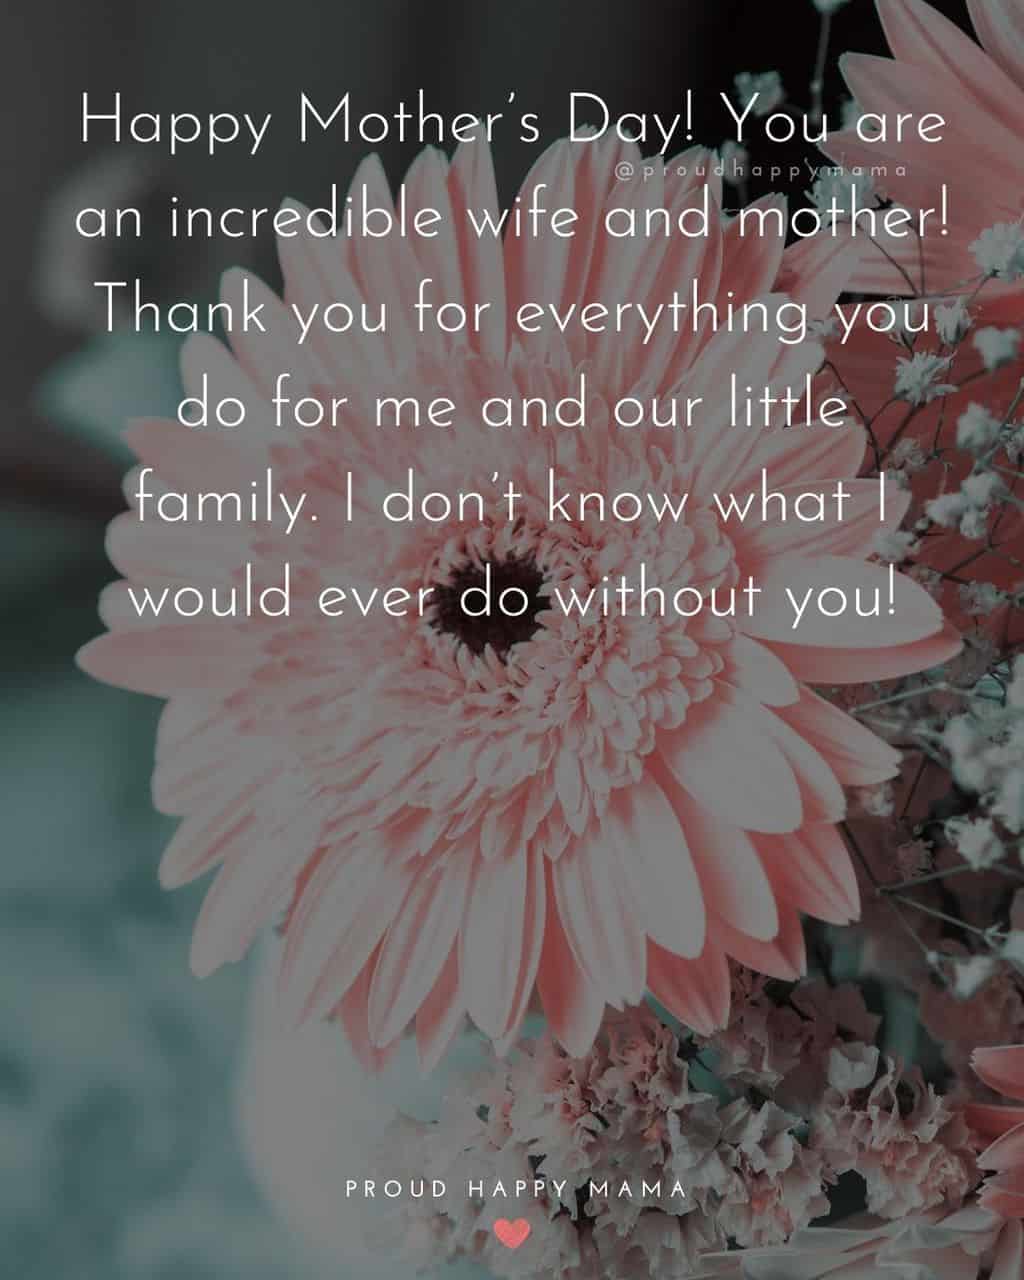 Happy Mothers Day Quotes For Wife - Happy Mother’s Day! You are an incredible wife and mother! Thank you for everything you